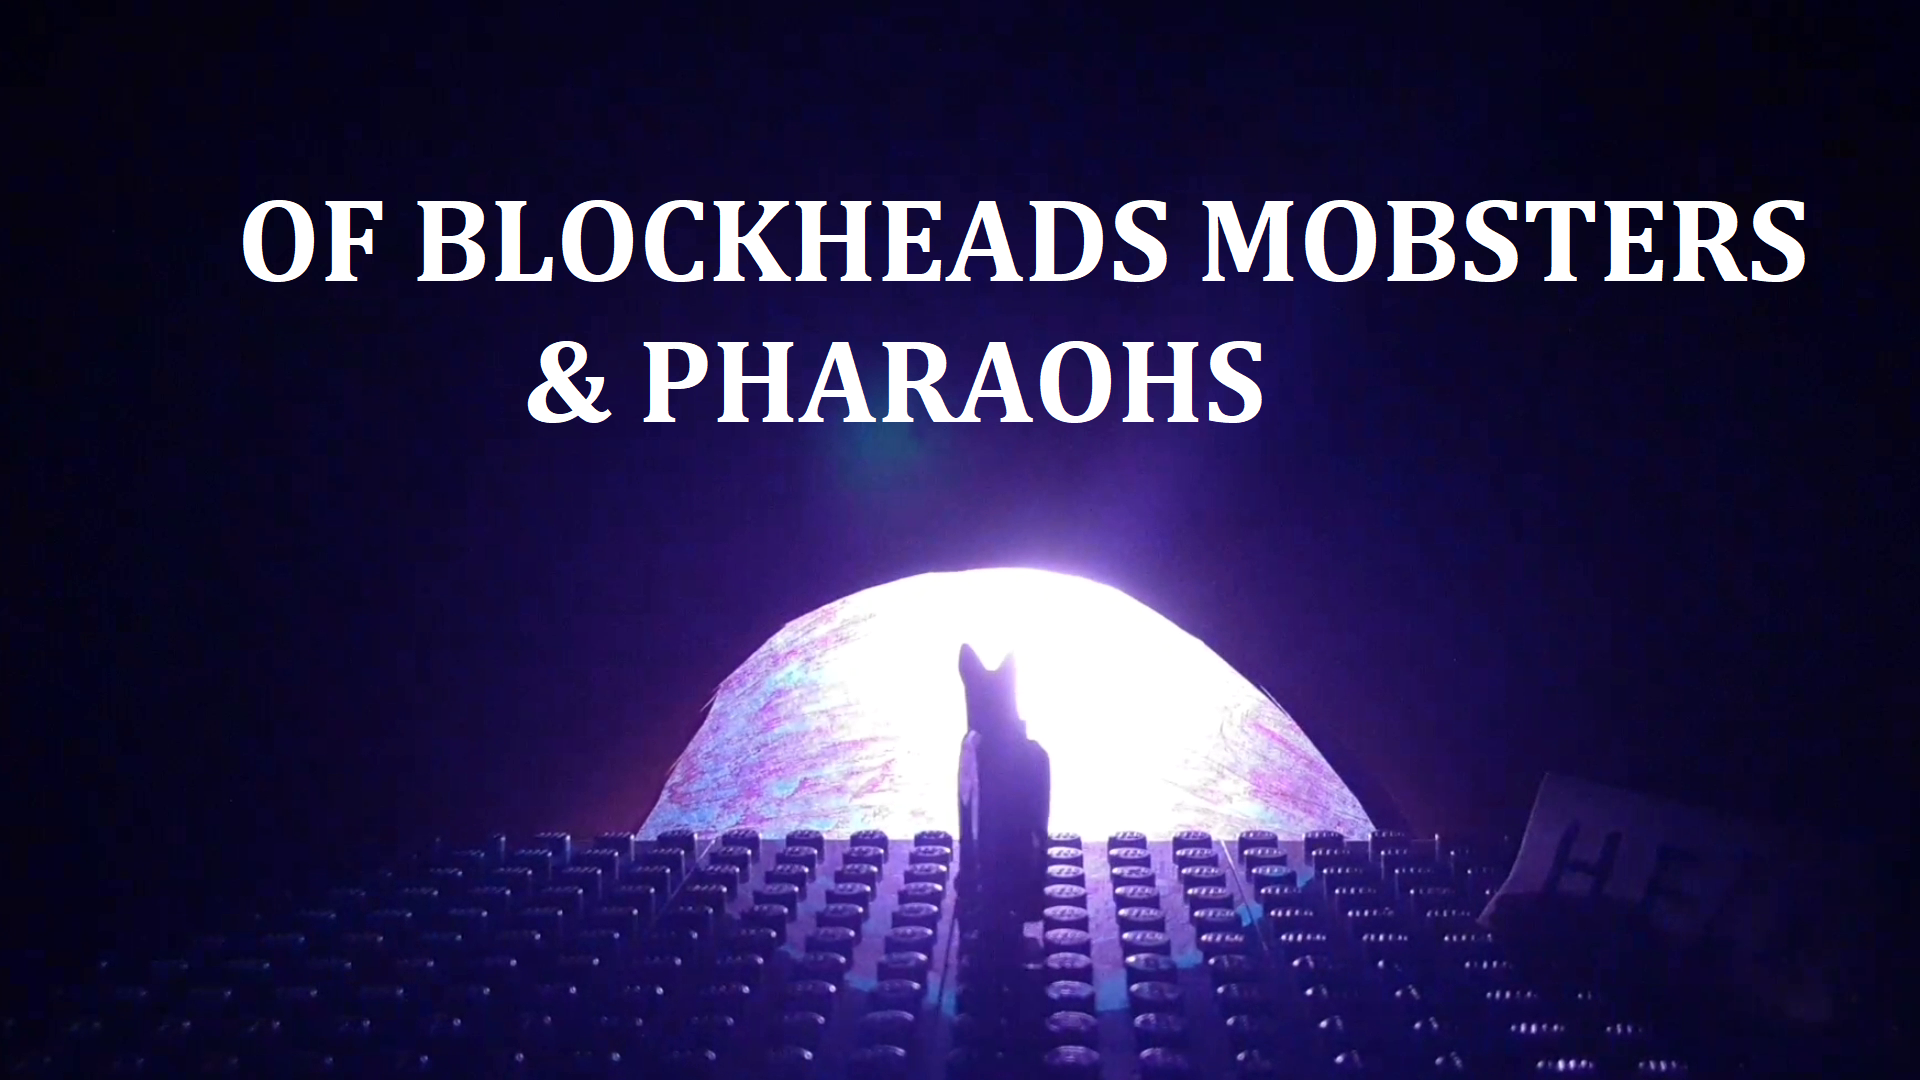 Of Blockheads Mobsters & Pharaohs